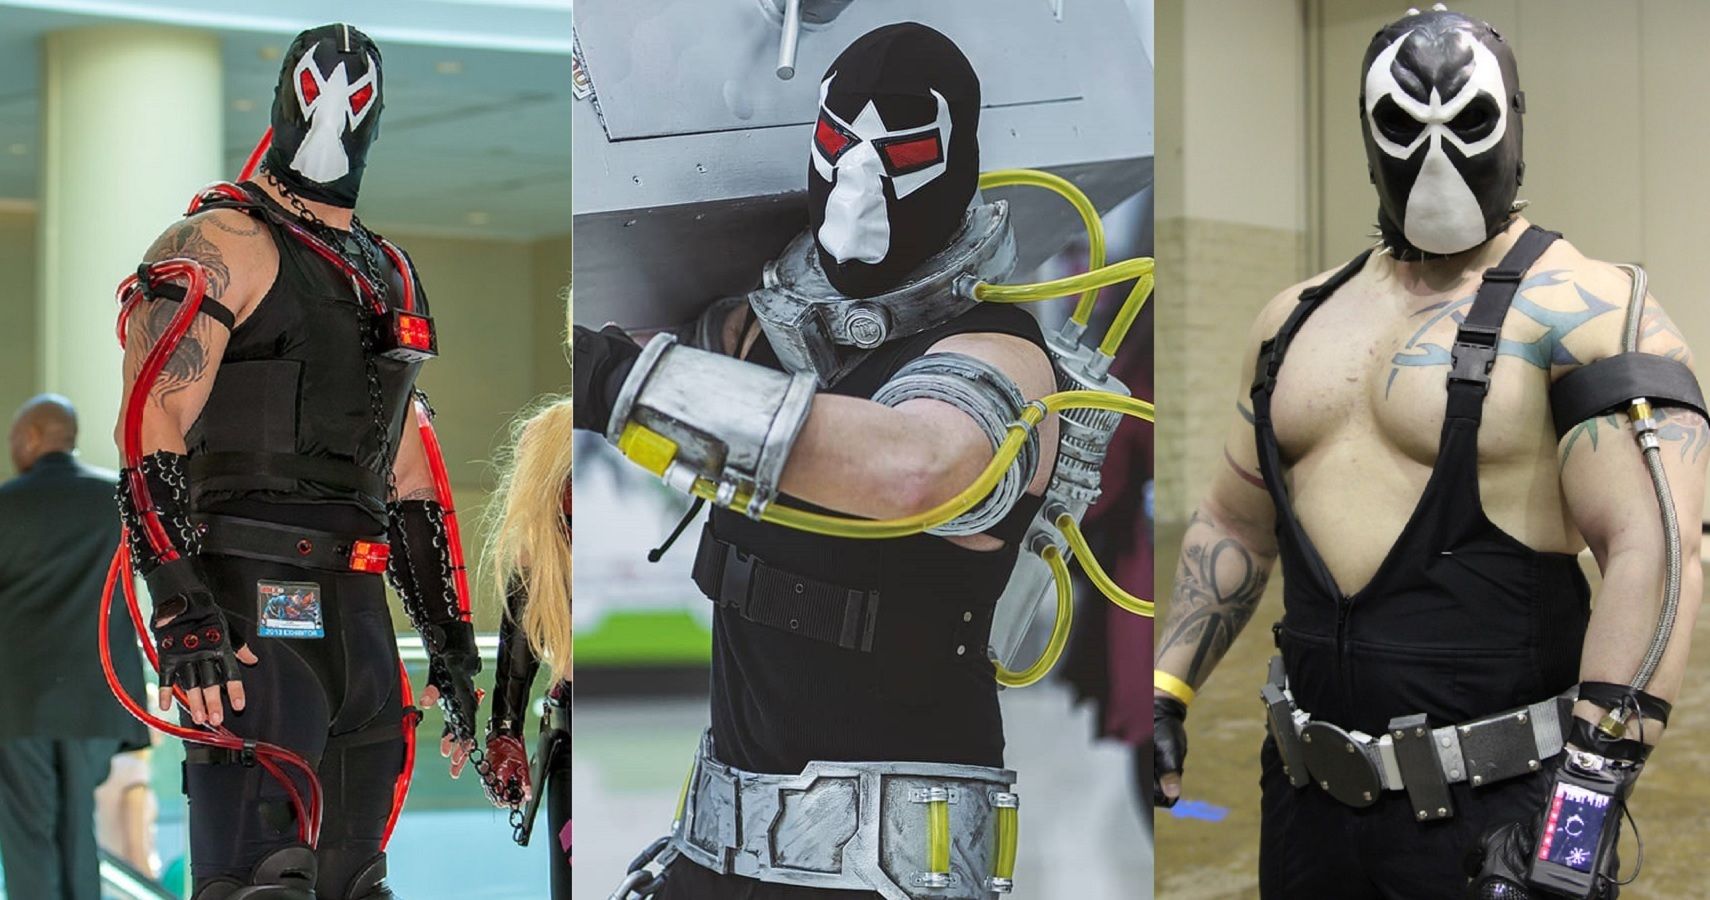 10 Awesome Bane Cosplay Every Batman & DC Fan Needs To See